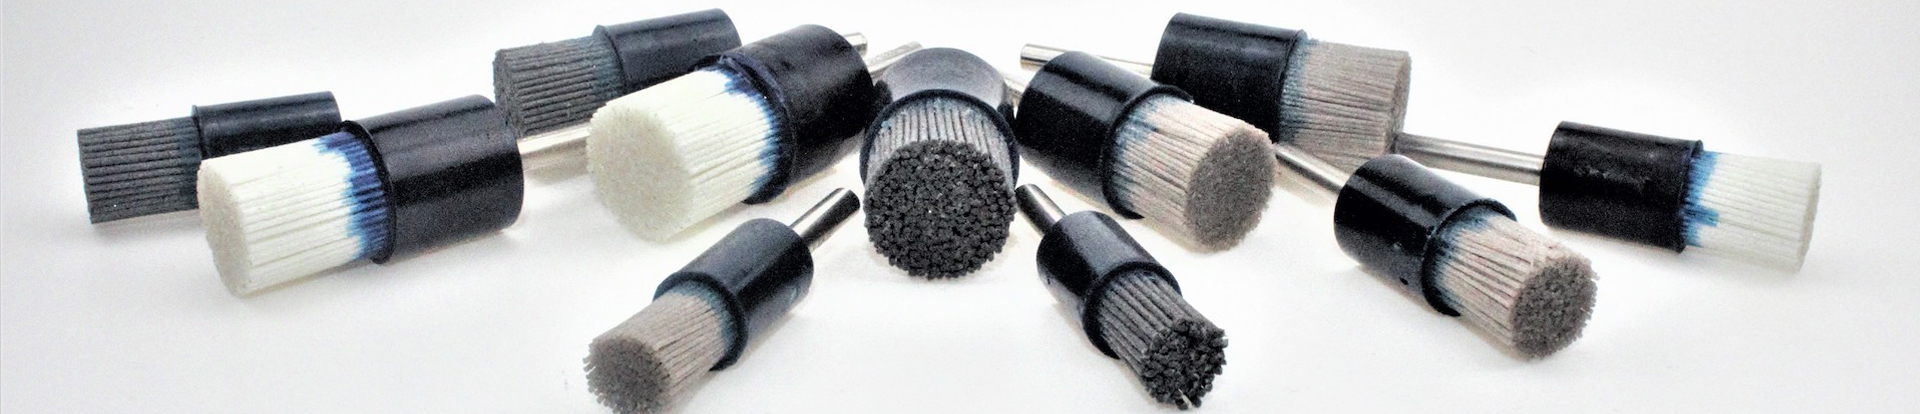 Number of Industrial Brushes and Working Characteristics of Abrasive Brush